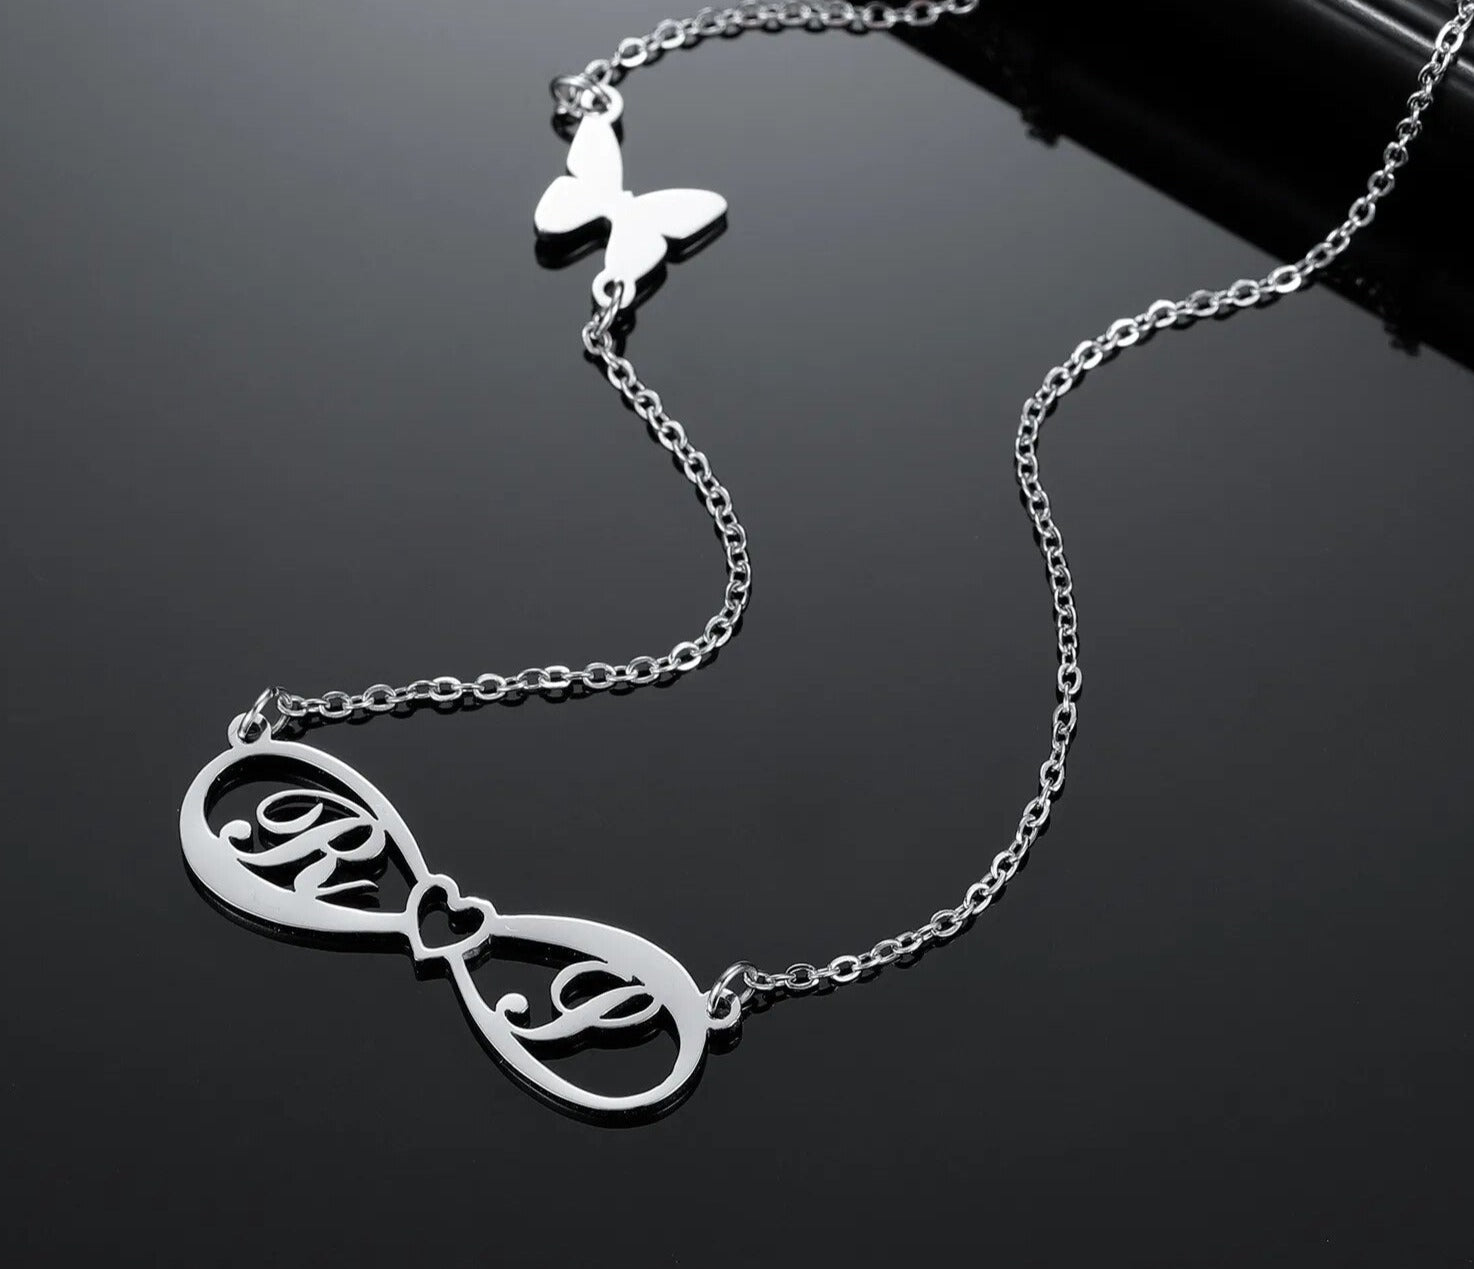 Personalized Infinity Name Necklace with Butterfly Pendant